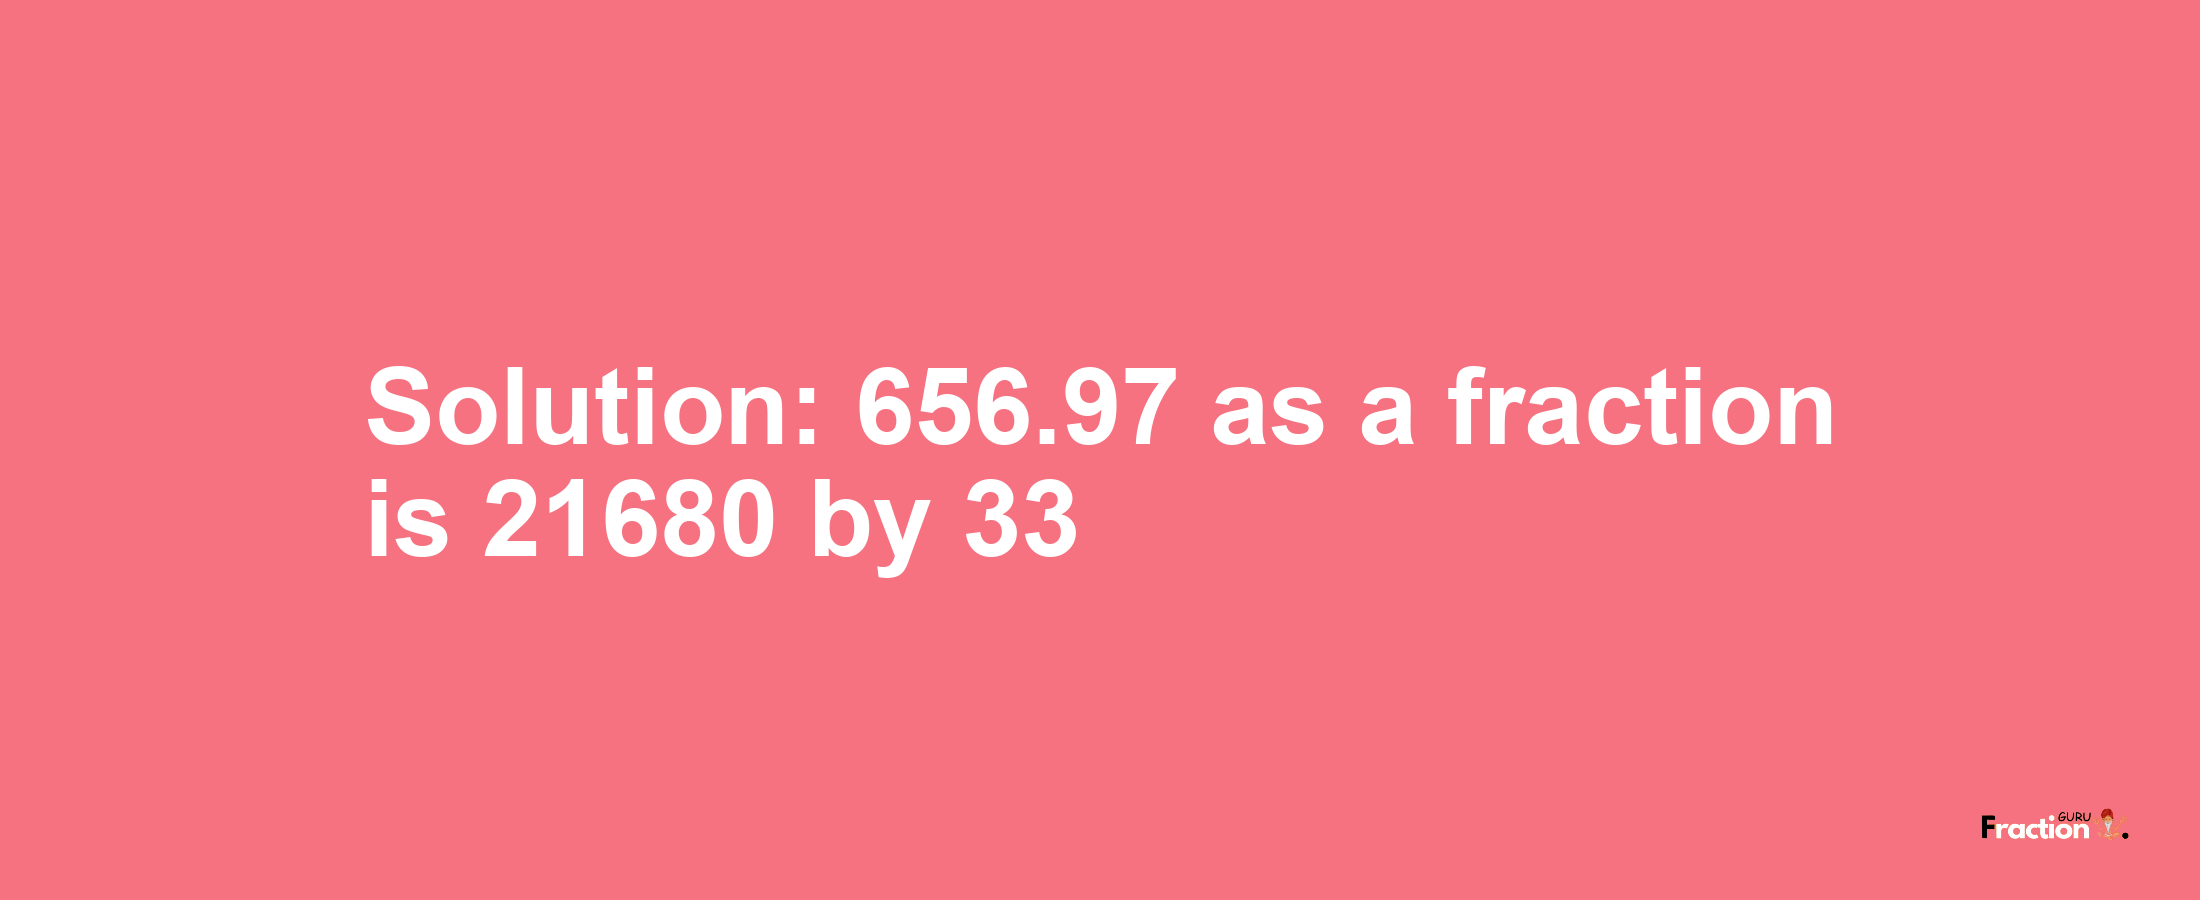 Solution:656.97 as a fraction is 21680/33